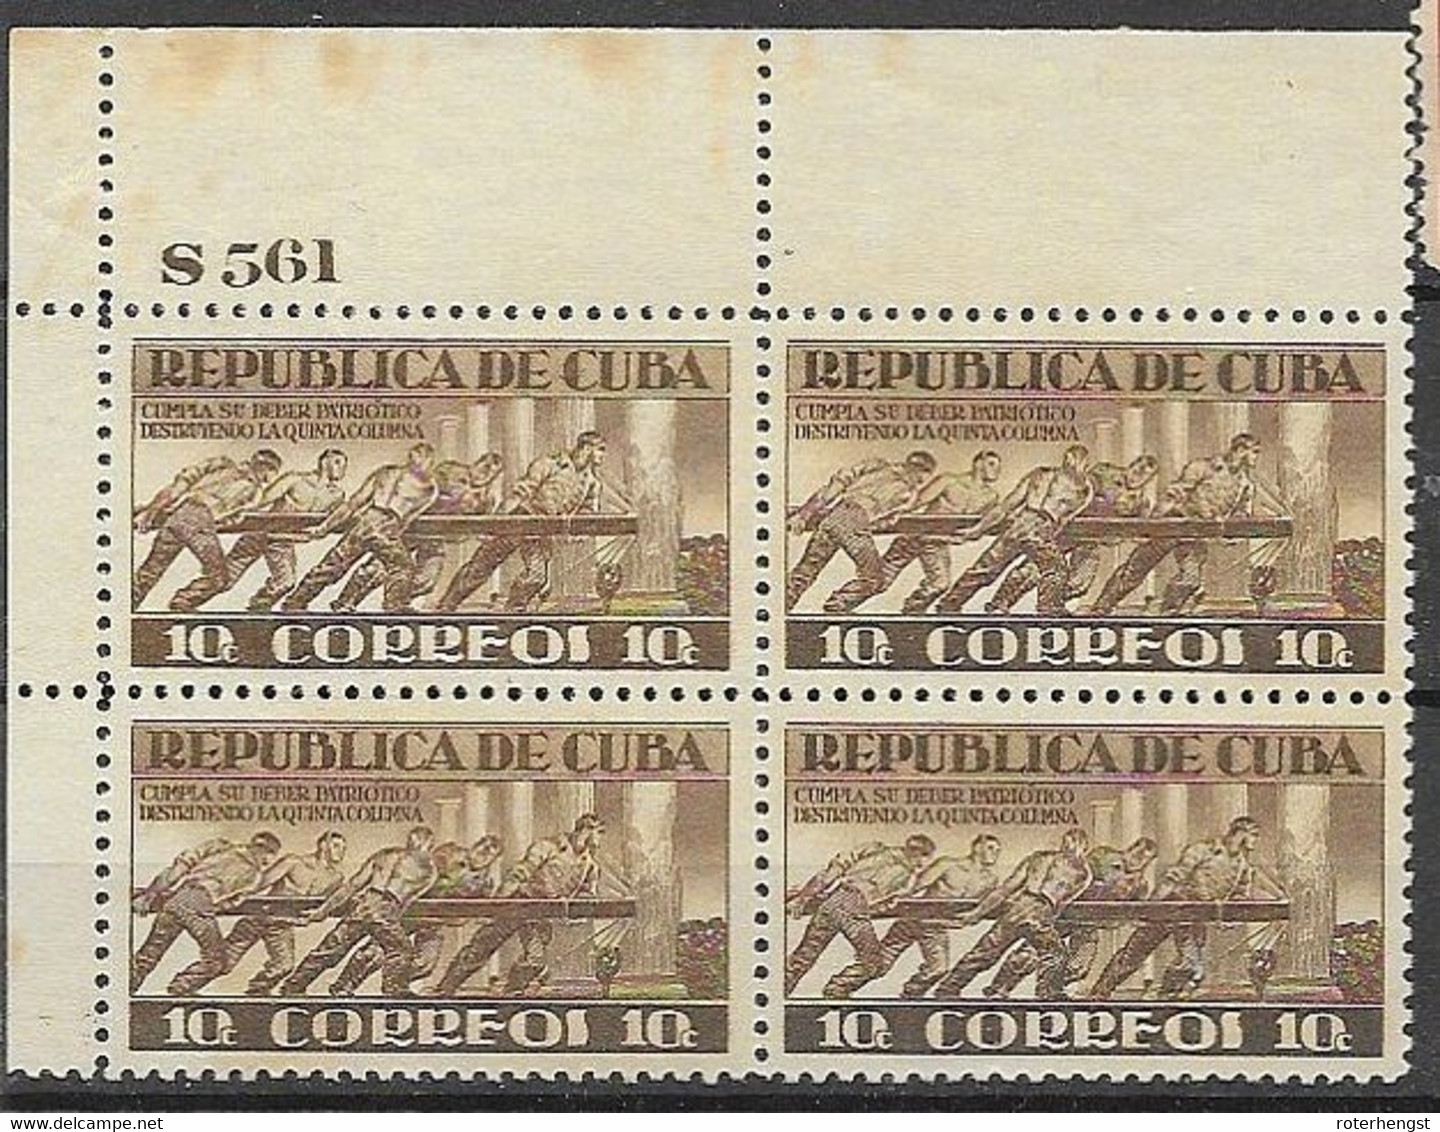 Cuba Mnh ** With Plate Number (stain Only On Border, Stamps Fine) 1943 About 30 Euros - Ongebruikt